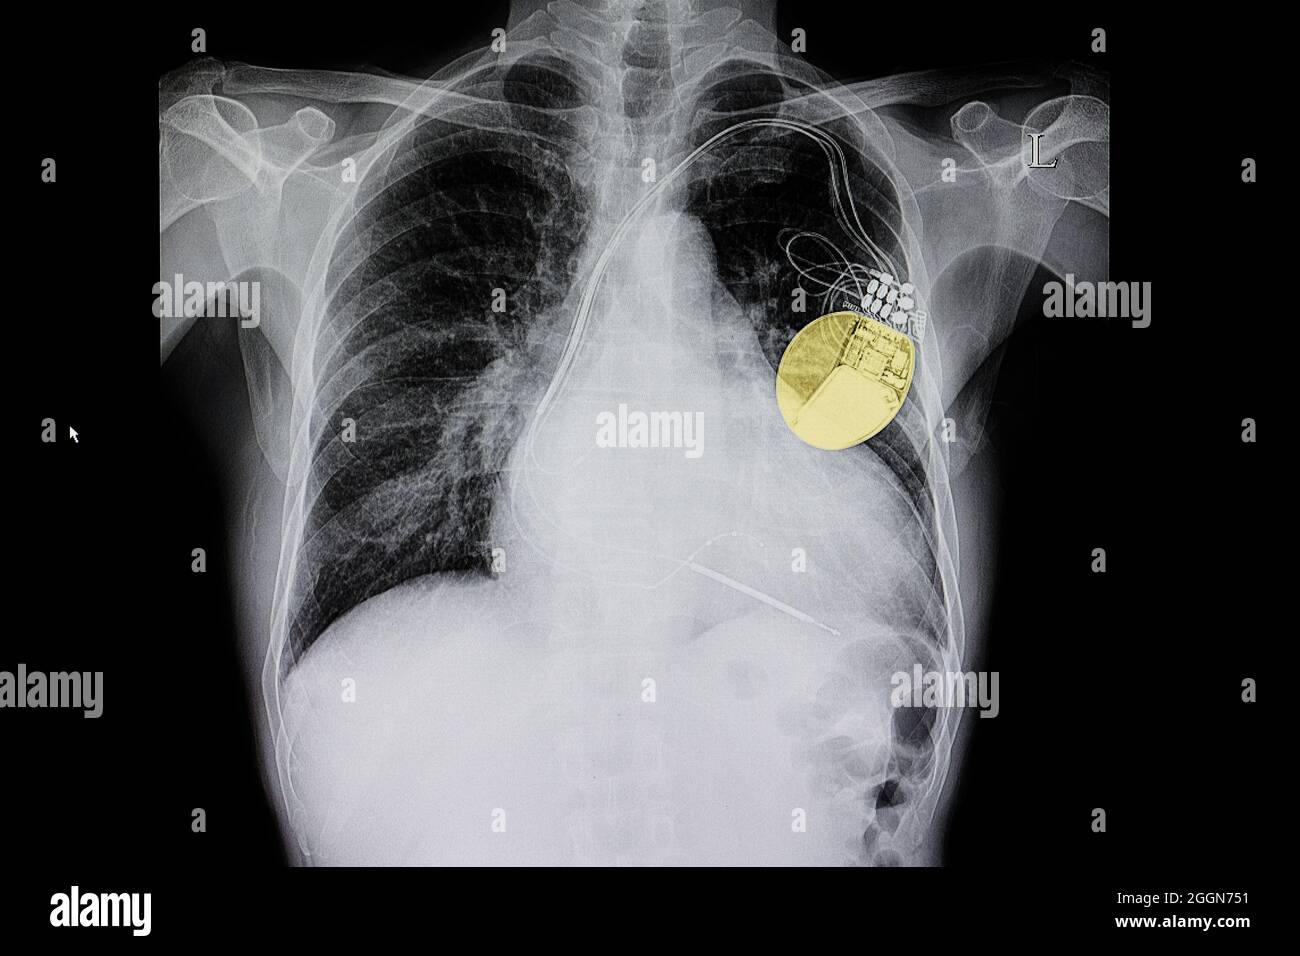 Chest Xray film of a patient with cardiomegaly and a cardiac pacemaker highlighted in yellow in his chest. Stock Photo